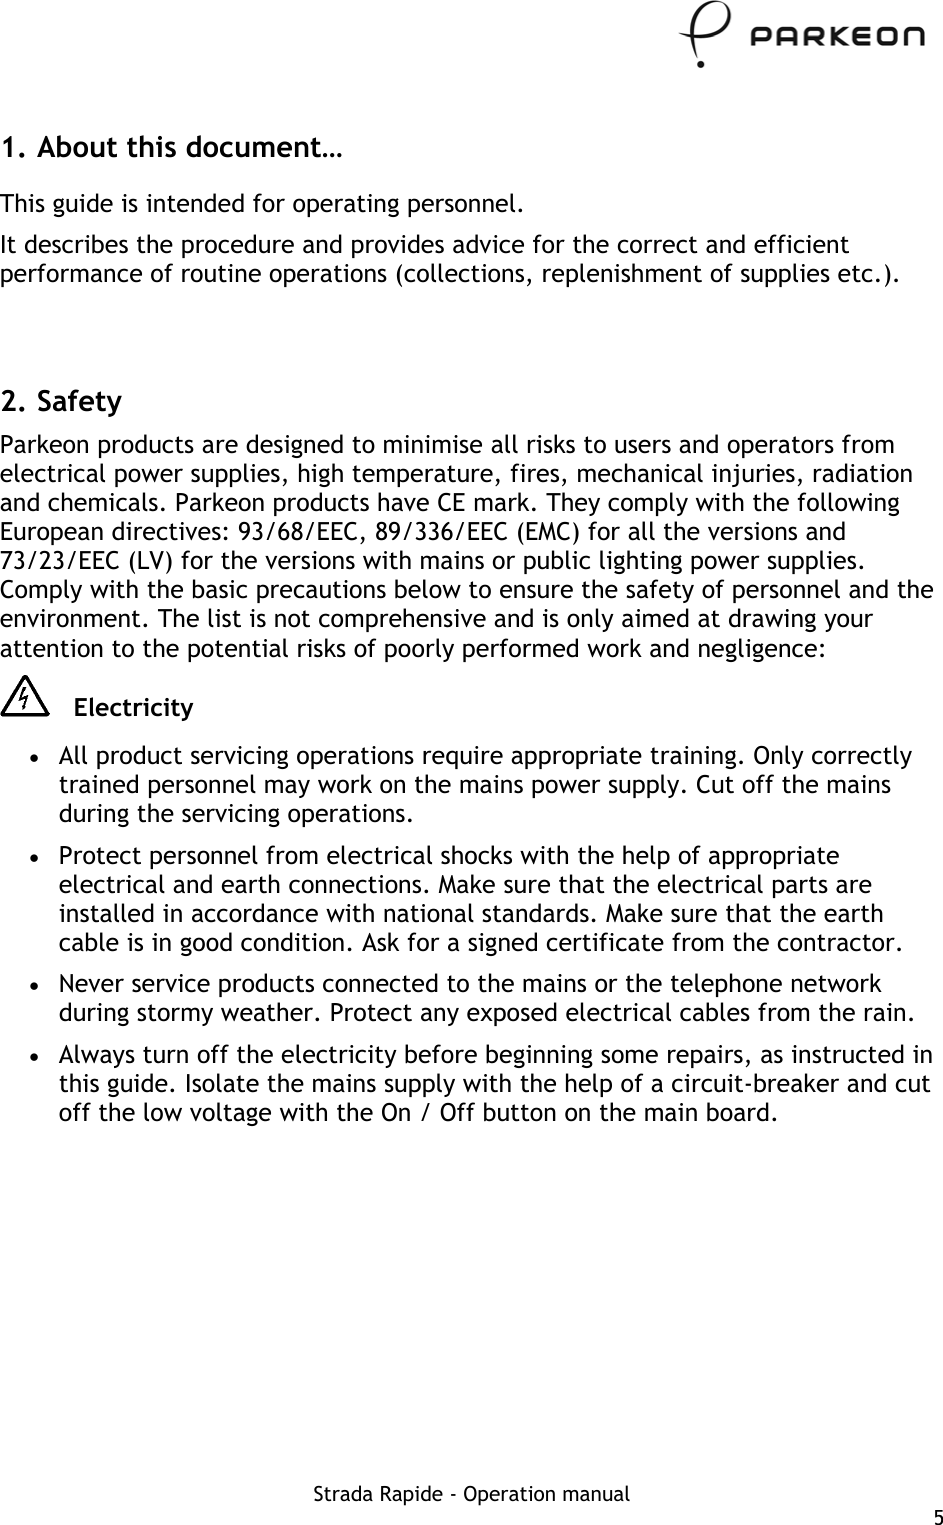     1. About this document… This guide is intended for operating personnel.  It describes the procedure and provides advice for the correct and efficient performance of routine operations (collections, replenishment of supplies etc.).   2. Safety Parkeon products are designed to minimise all risks to users and operators from electrical power supplies, high temperature, fires, mechanical injuries, radiation and chemicals. Parkeon products have CE mark. They comply with the following European directives: 93/68/EEC, 89/336/EEC (EMC) for all the versions and 73/23/EEC (LV) for the versions with mains or public lighting power supplies. Comply with the basic precautions below to ensure the safety of personnel and the environment. The list is not comprehensive and is only aimed at drawing your attention to the potential risks of poorly performed work and negligence:  Electricity •  All product servicing operations require appropriate training. Only correctly trained personnel may work on the mains power supply. Cut off the mains during the servicing operations. •  Protect personnel from electrical shocks with the help of appropriate electrical and earth connections. Make sure that the electrical parts are installed in accordance with national standards. Make sure that the earth cable is in good condition. Ask for a signed certificate from the contractor. •  Never service products connected to the mains or the telephone network during stormy weather. Protect any exposed electrical cables from the rain. •  Always turn off the electricity before beginning some repairs, as instructed in this guide. Isolate the mains supply with the help of a circuit-breaker and cut off the low voltage with the On / Off button on the main board. Strada Rapide - Operation manual  5 